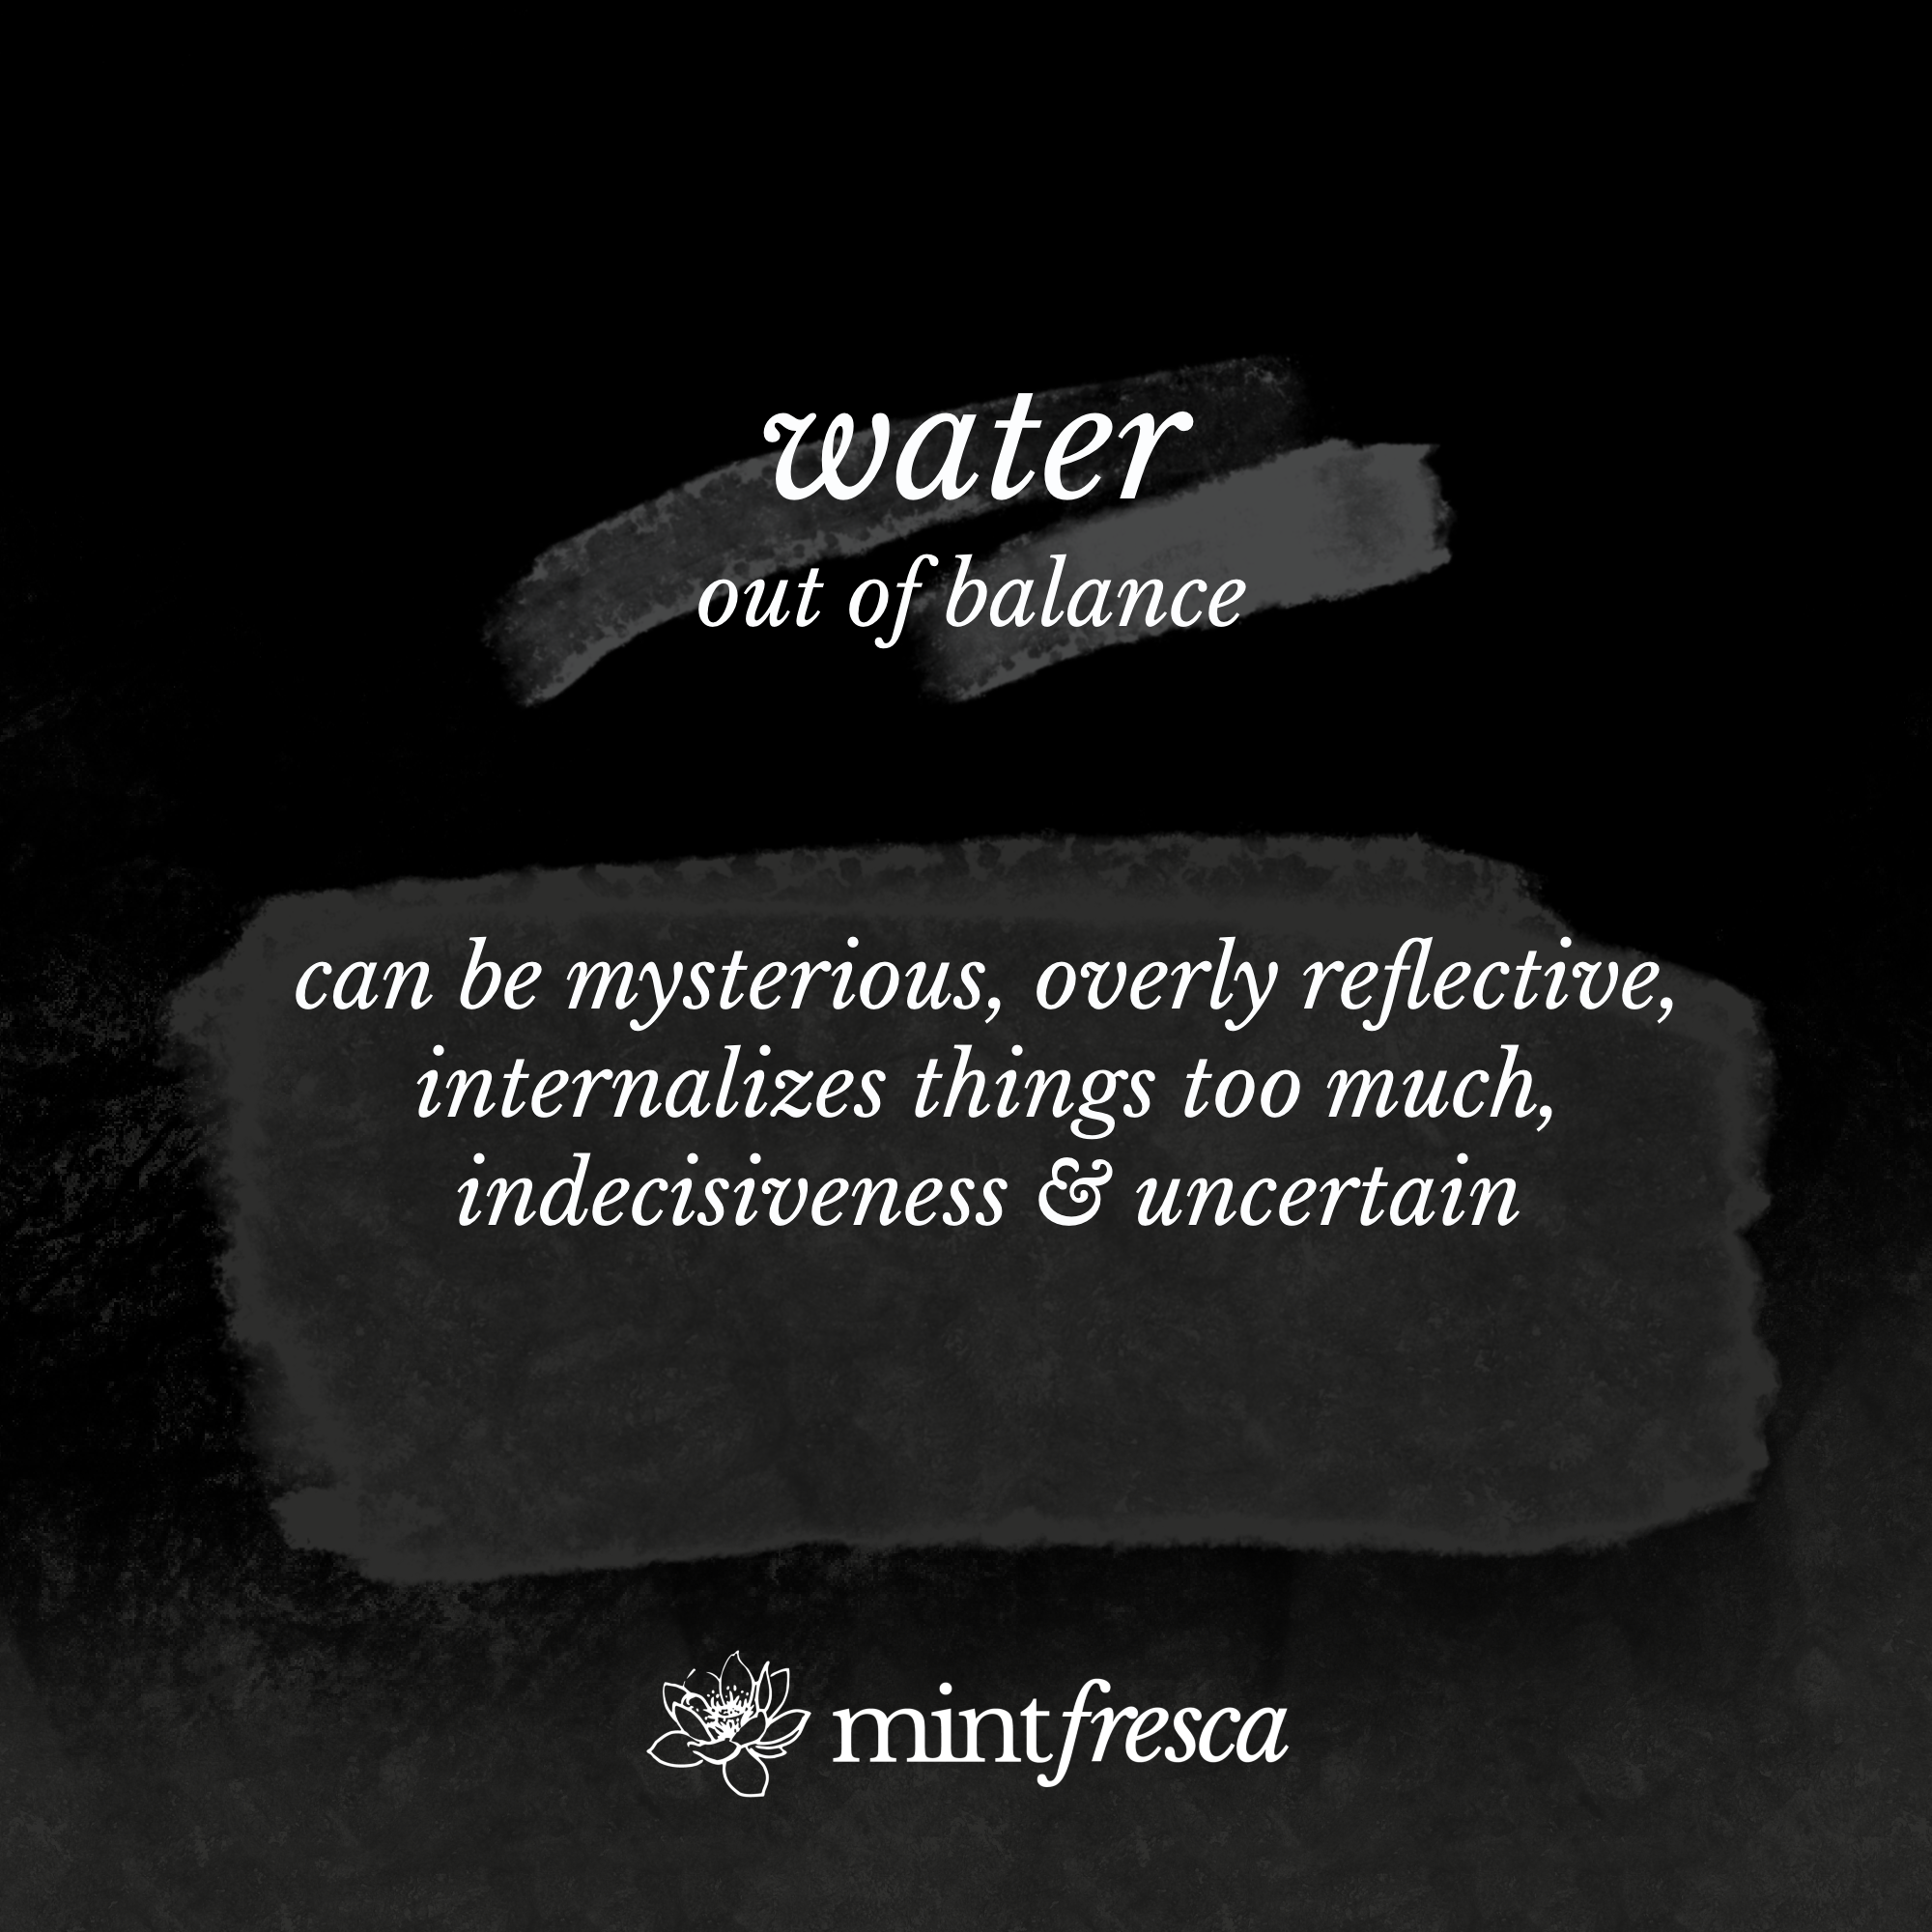 water out of balance